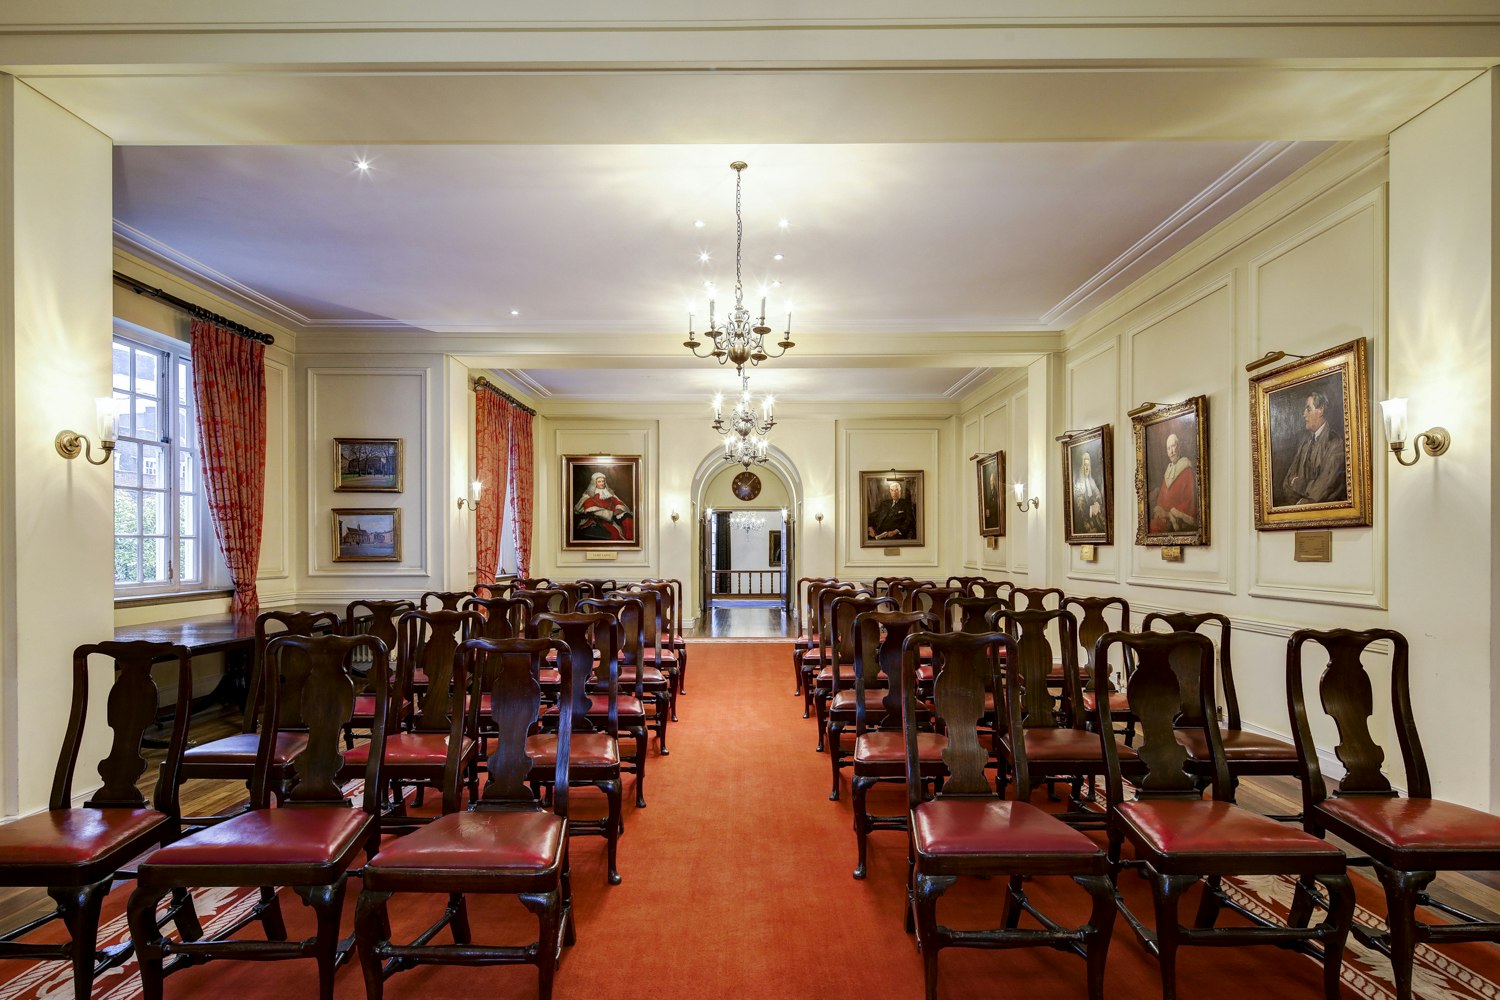 The Honourable Society of Gray's Inn - Large Pension Room image 4